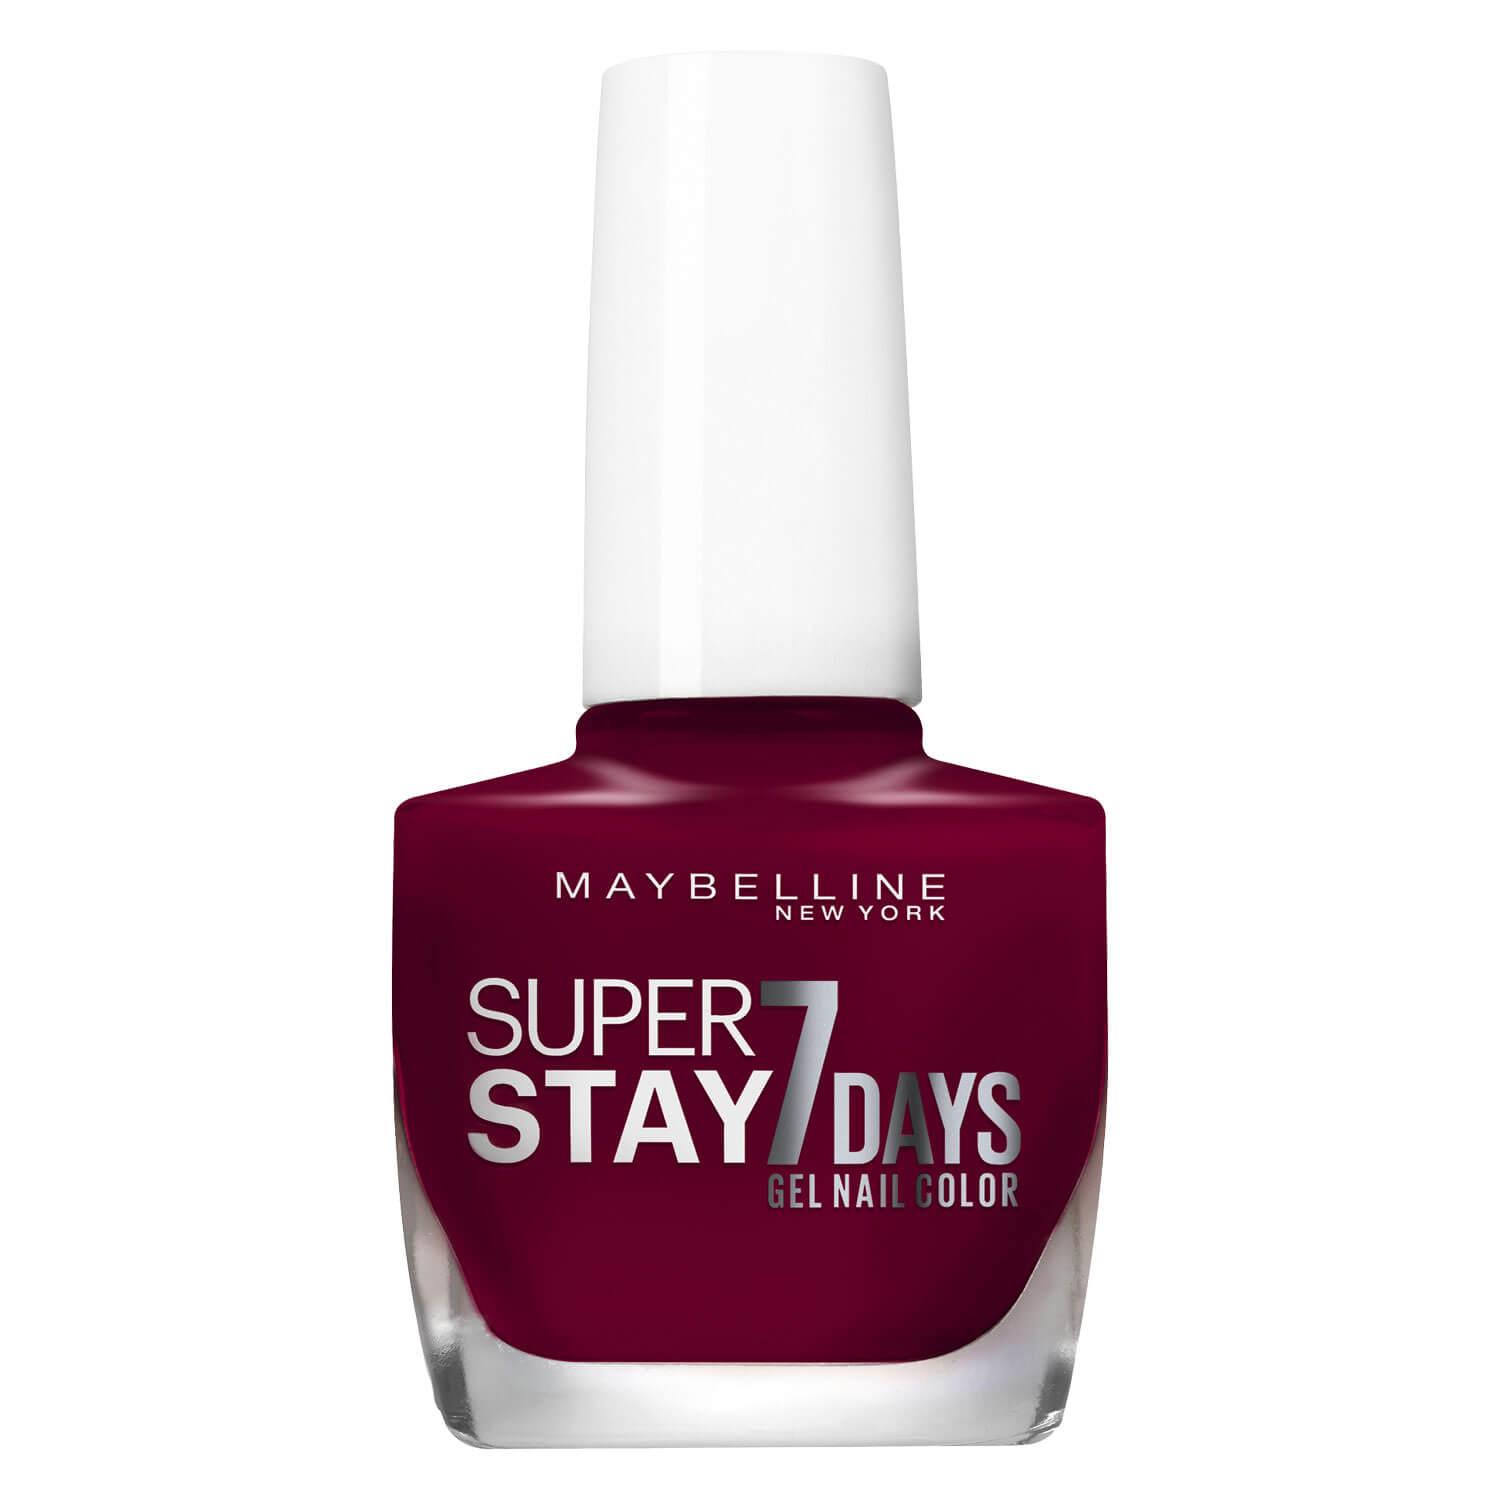 Maybelline NY Nails - Super Stay 7 Days Nagellack Nr. 924 Magenta Muse